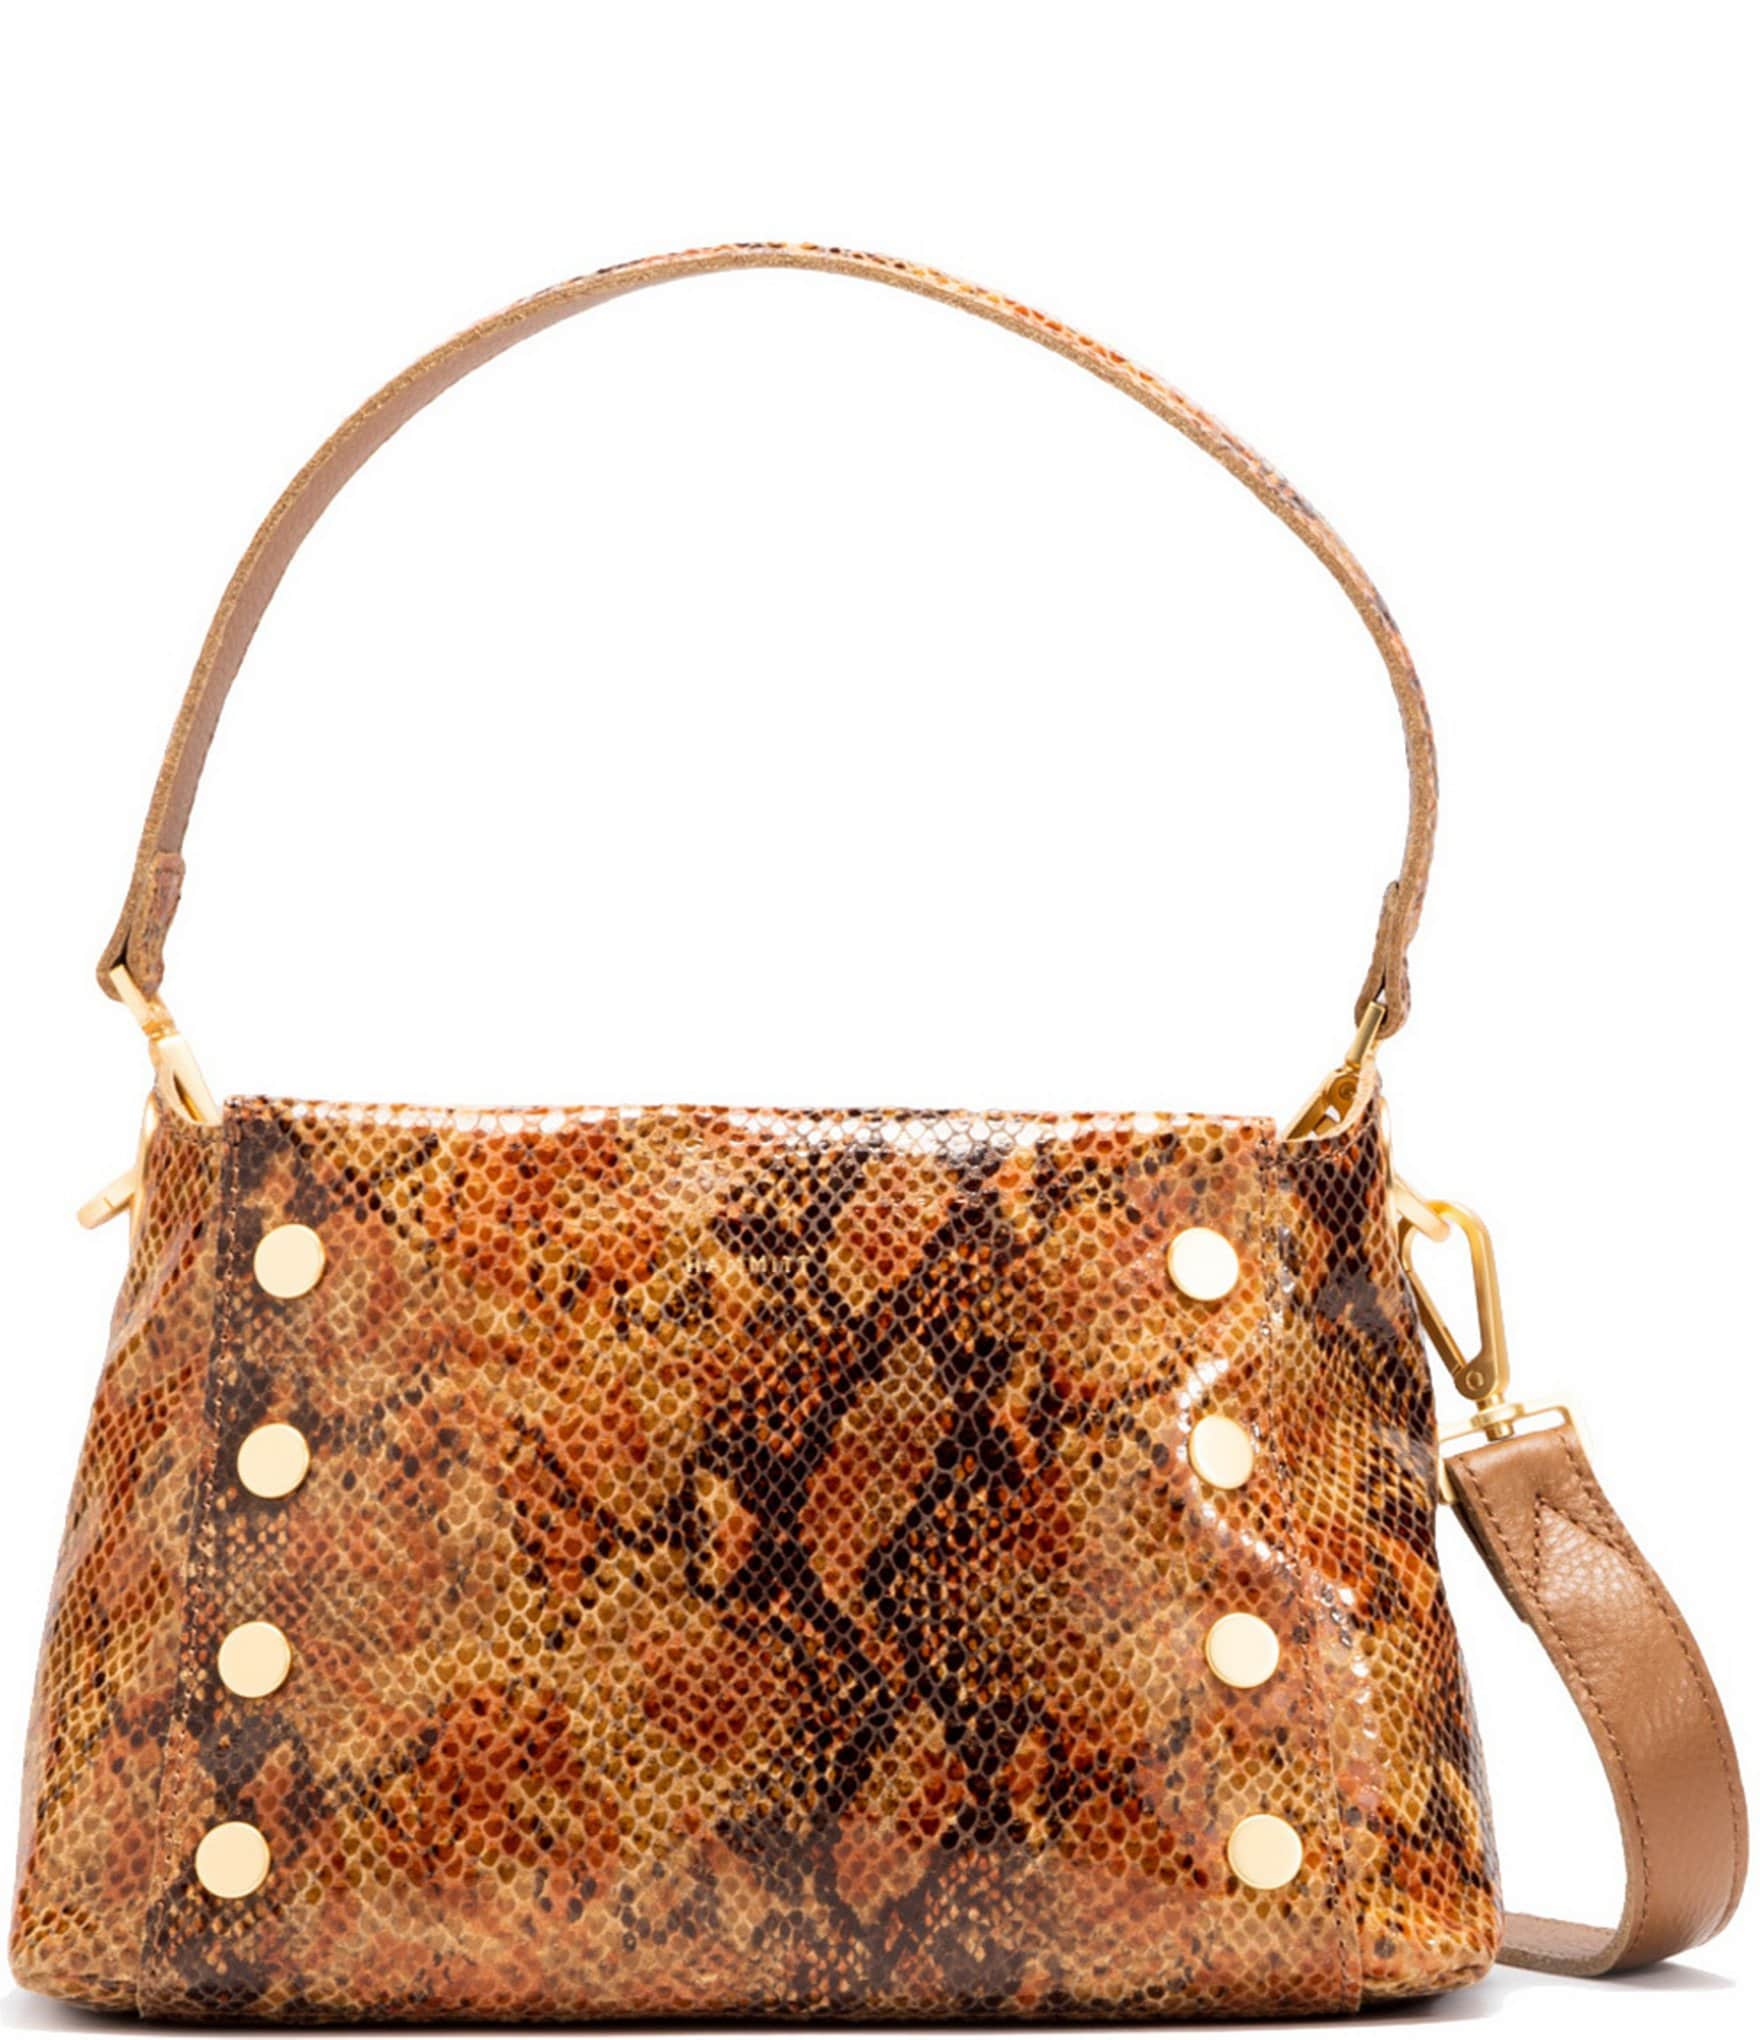 Tan Purse With Gold Chain Handle